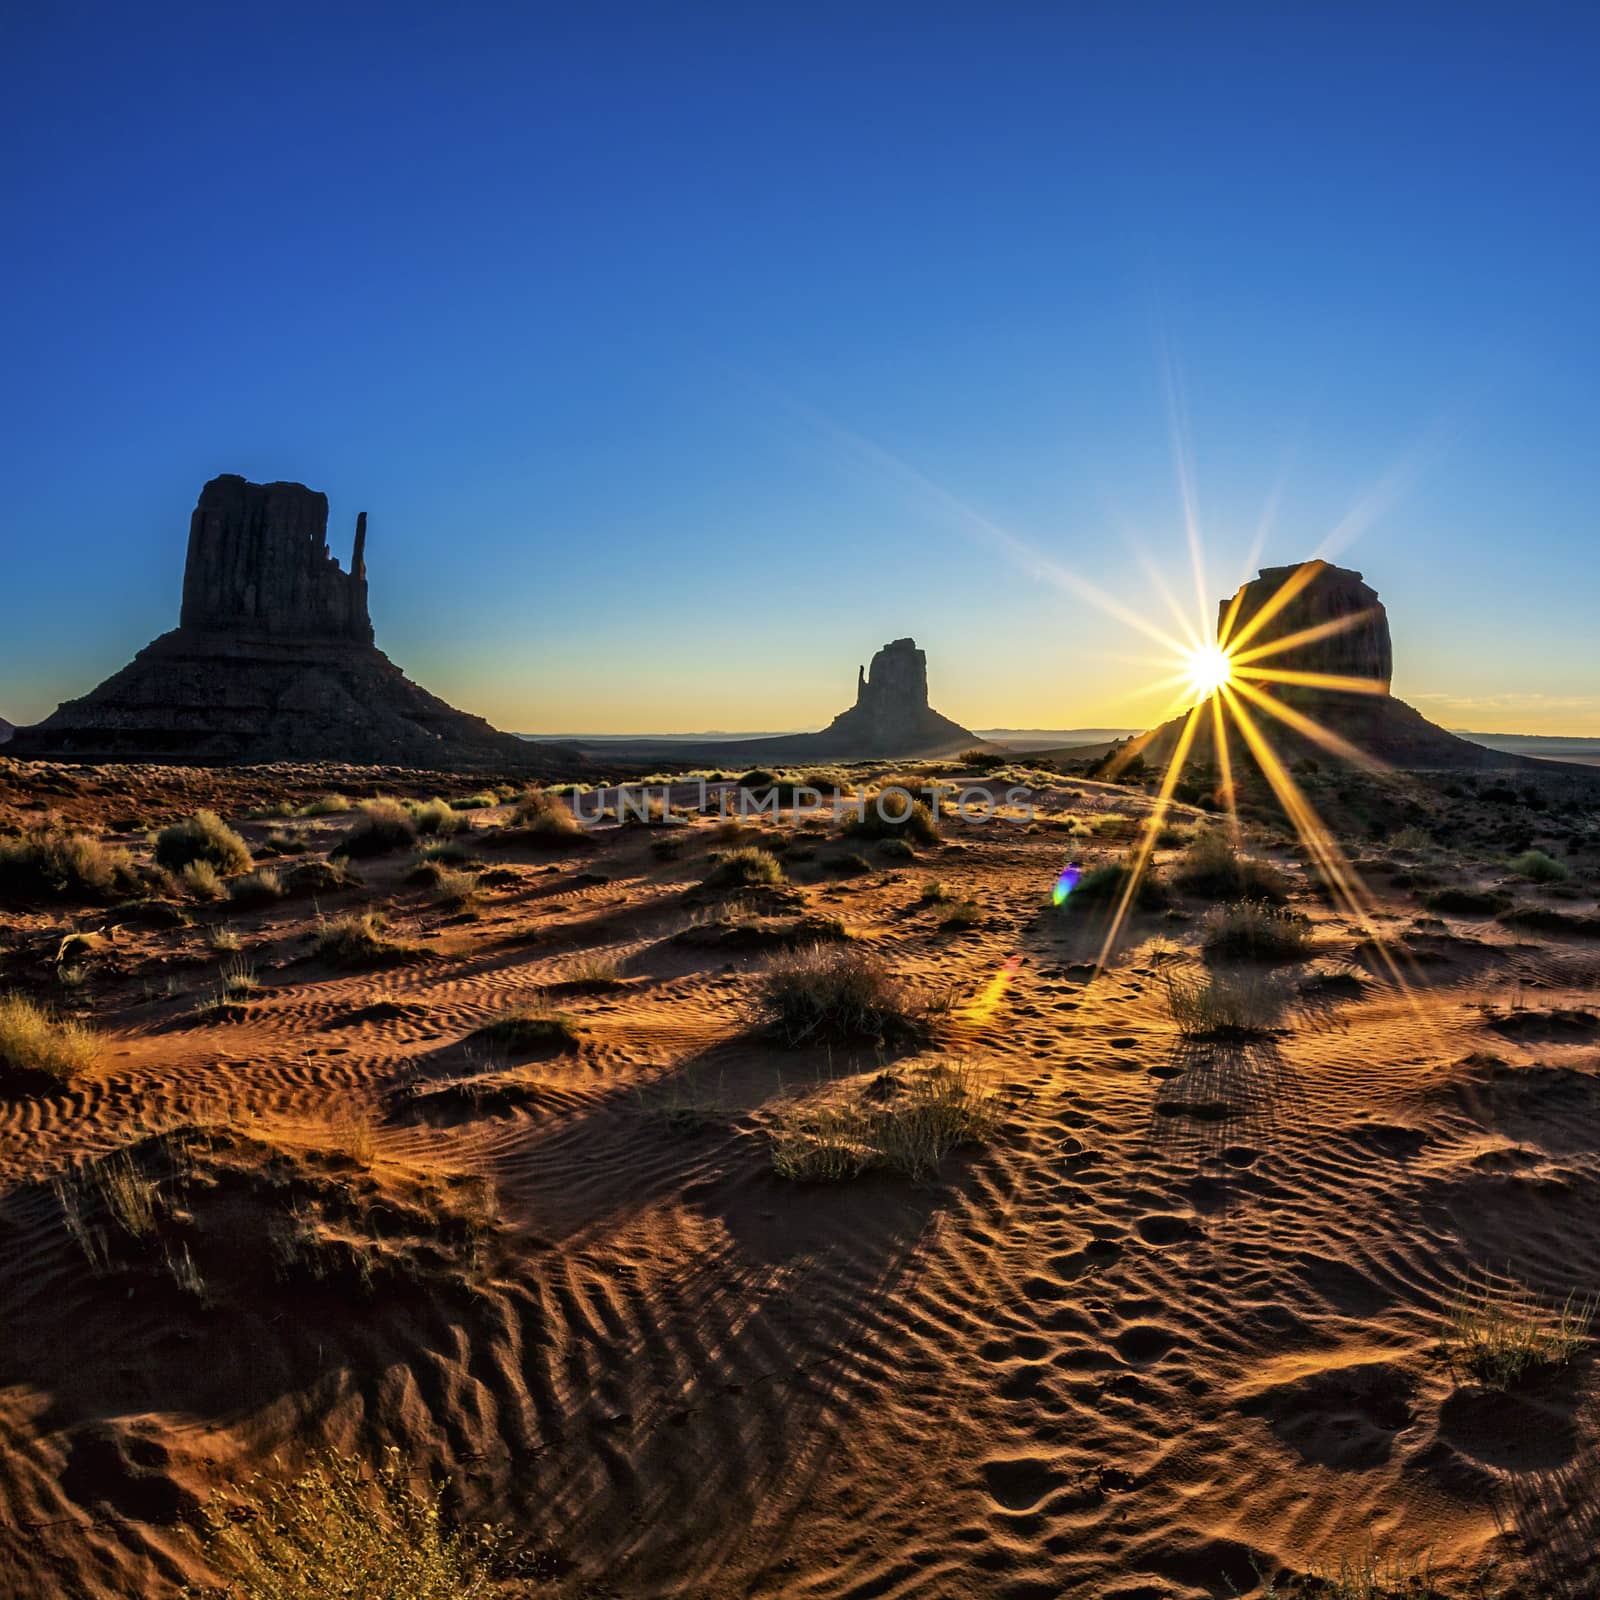 Great sunrise at Monument Valley by vwalakte